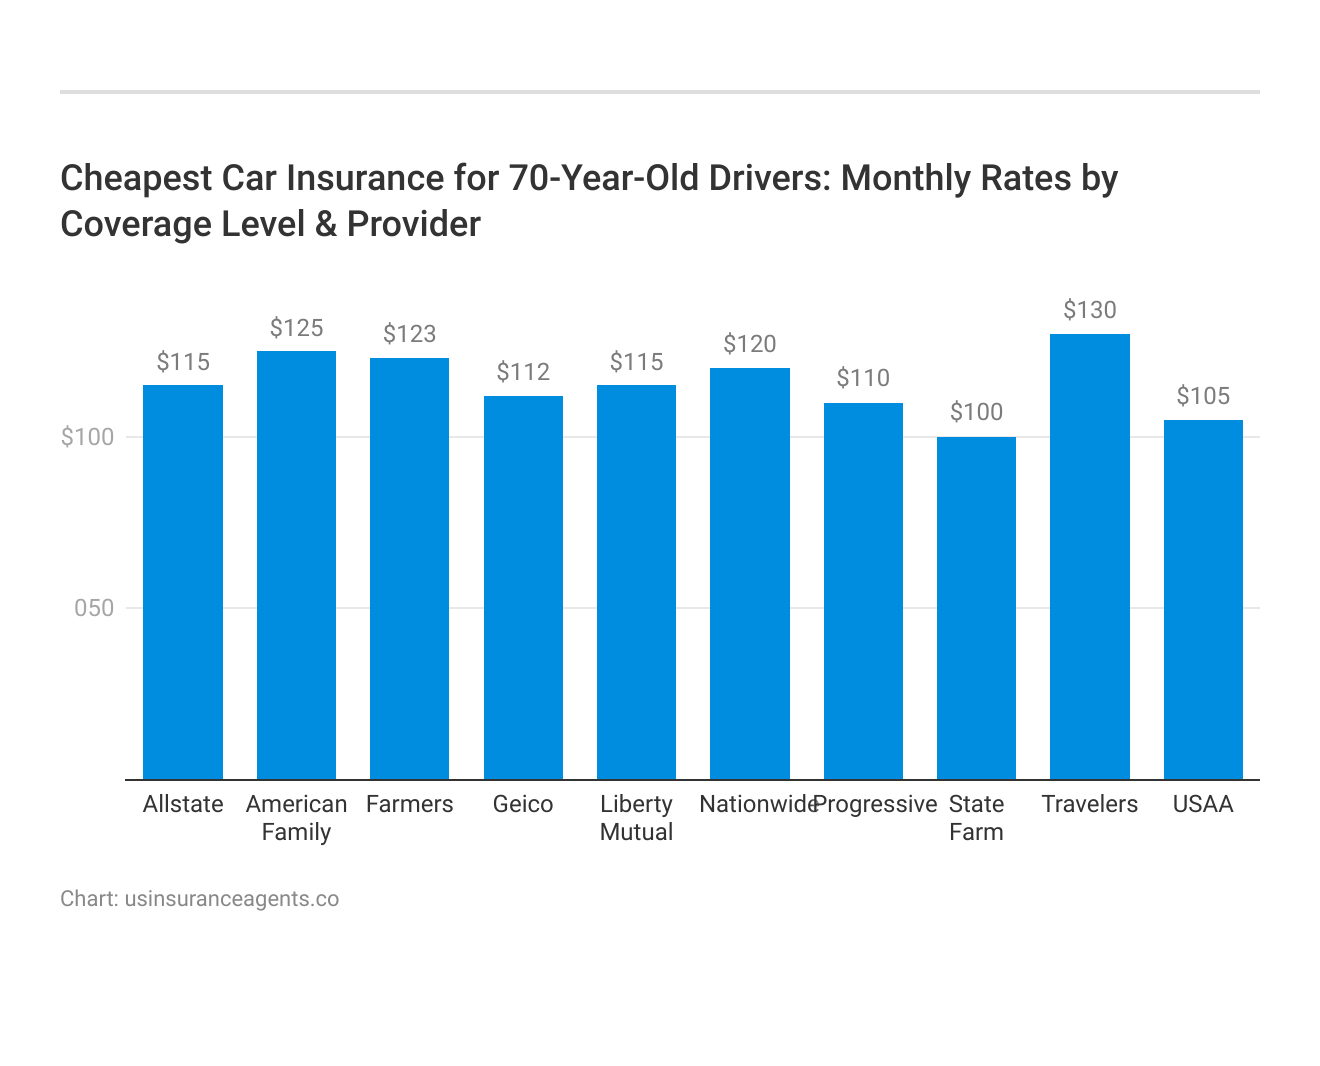 <h3>Cheapest Car Insurance for 70-Year-Old Drivers: Monthly Rates by Coverage Level & Provider</h3>